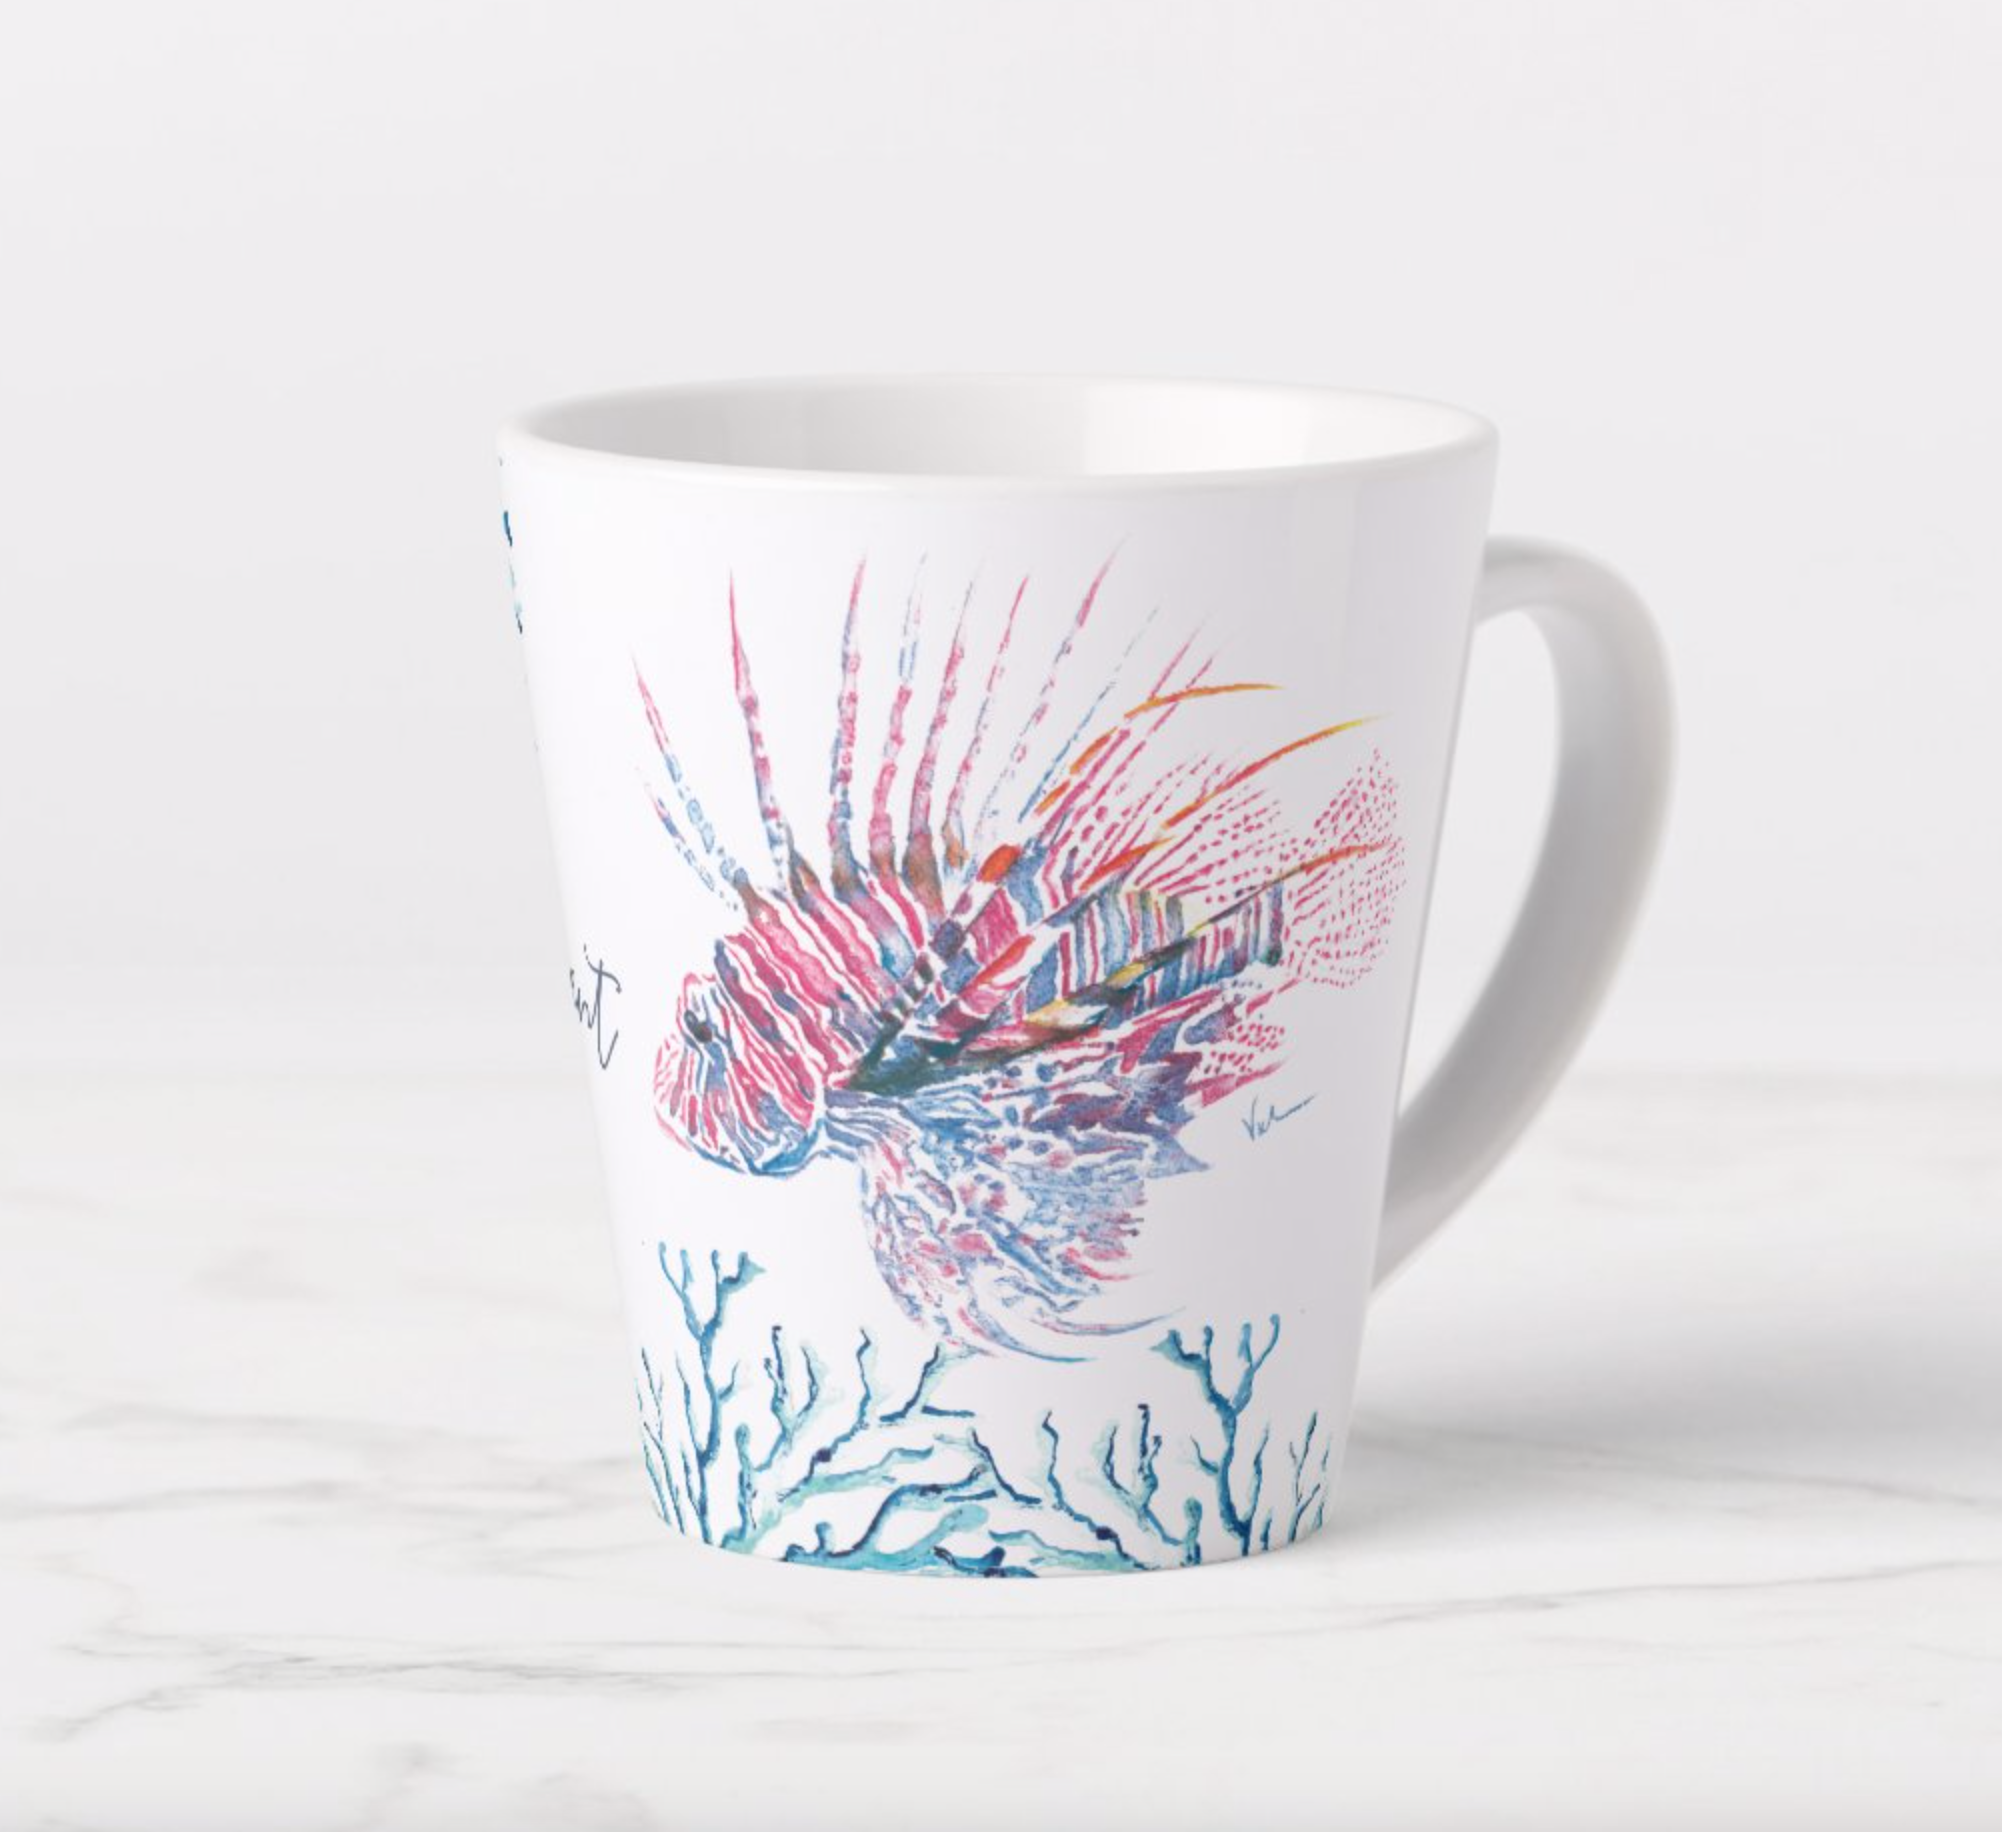 Latte mug designed with a replica of my original watercolor lionfish in shades of reds and blues